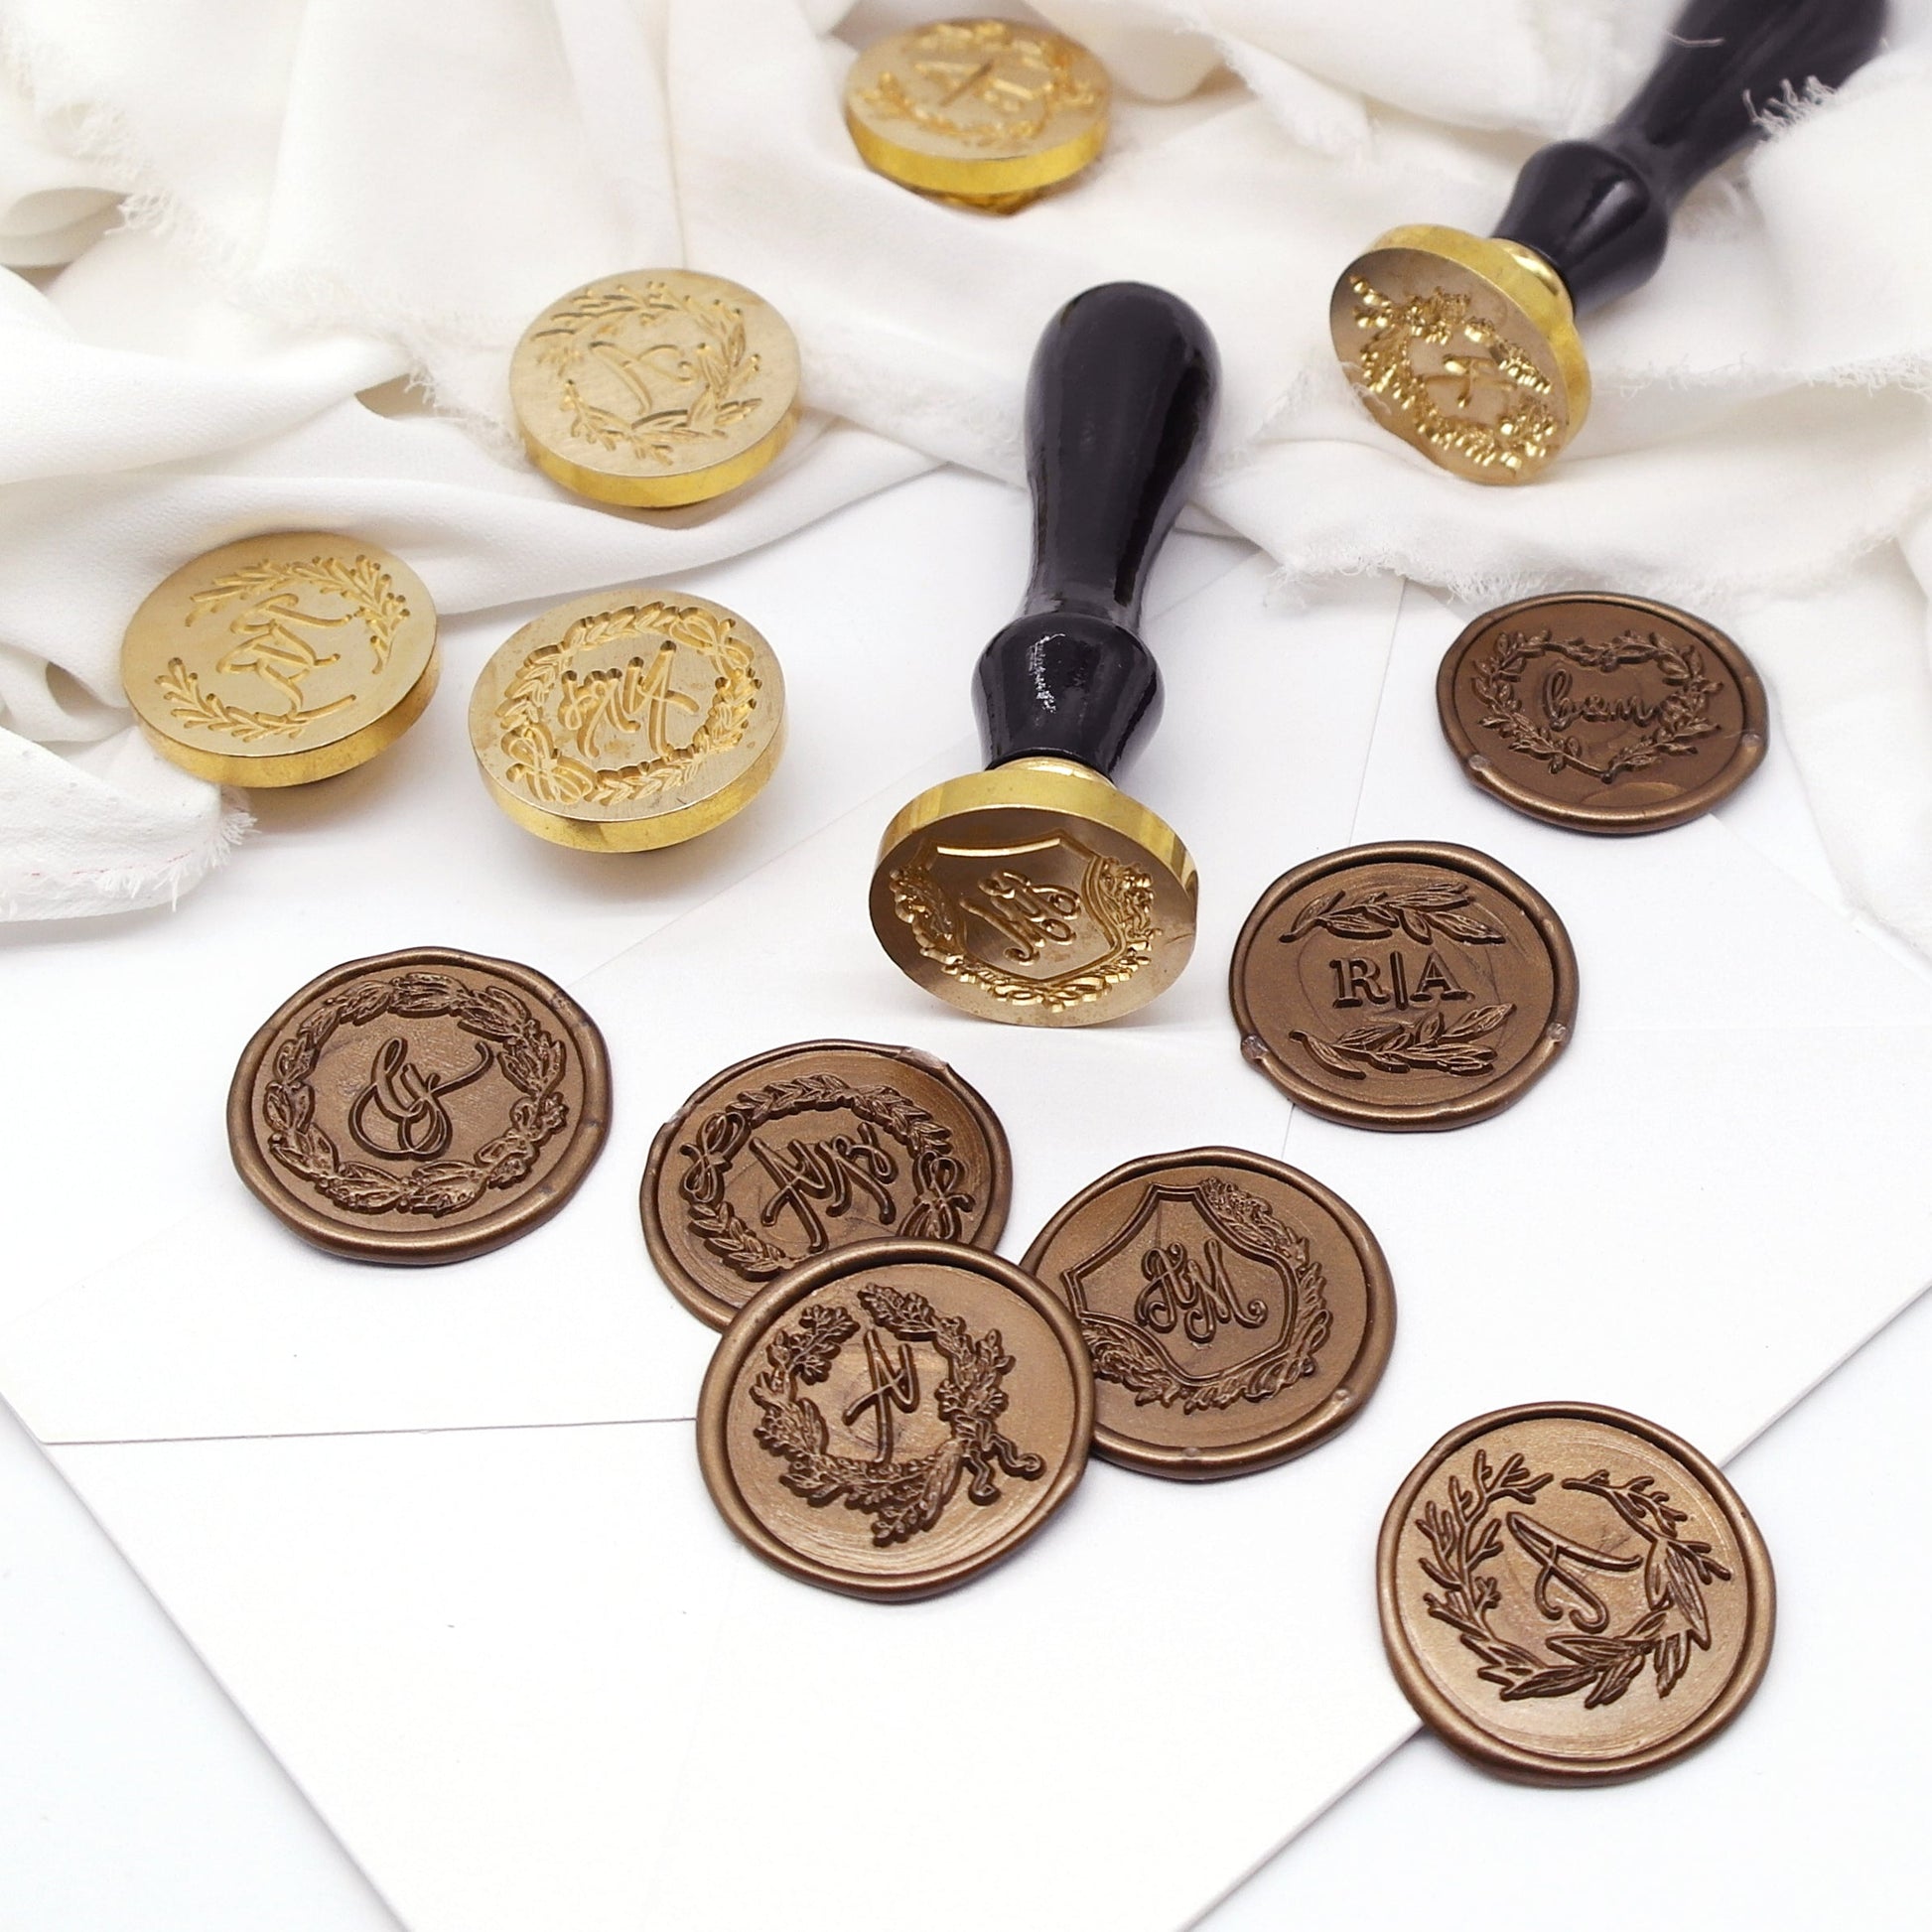 Seven wedding wax seals with wreath and monogram artwork created on a white envelope.Two wax stamps with black wooden handle lie down on the envelope and white cloth,nearby,standing four brass heads.